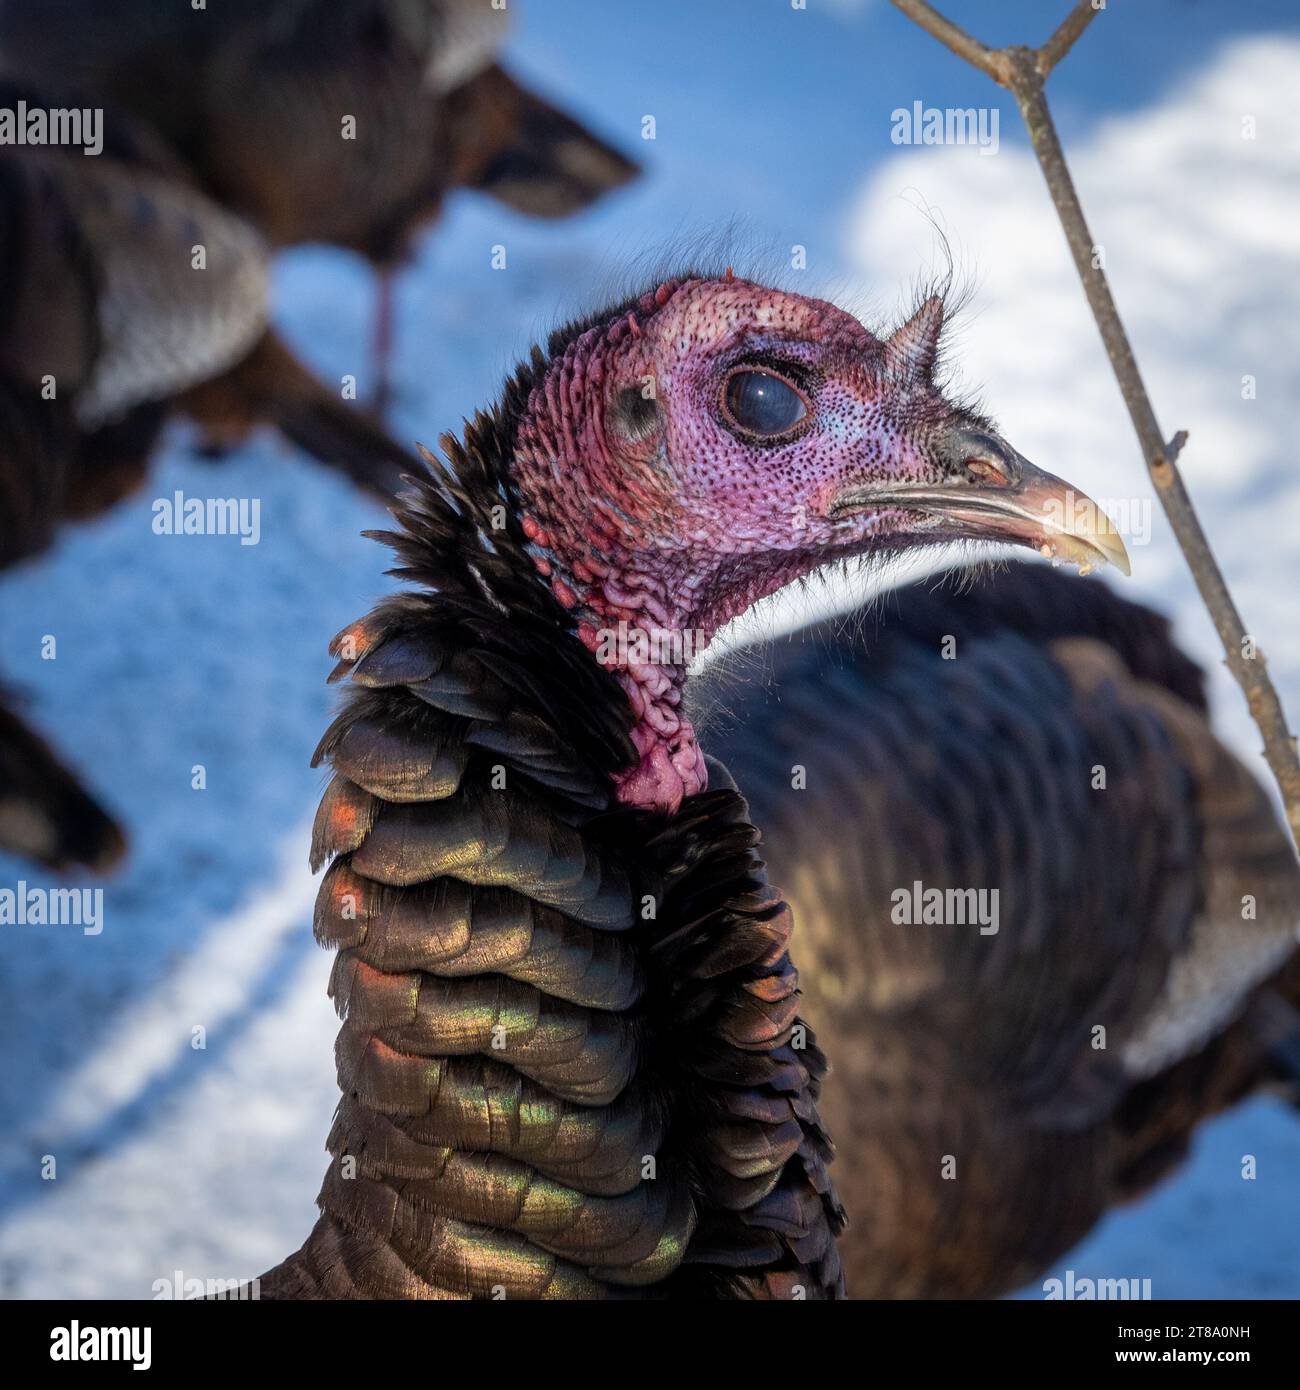 The head of a wild turkey, taken on a winter sunny day near Montreal, Quebec, Canada Stock Photo